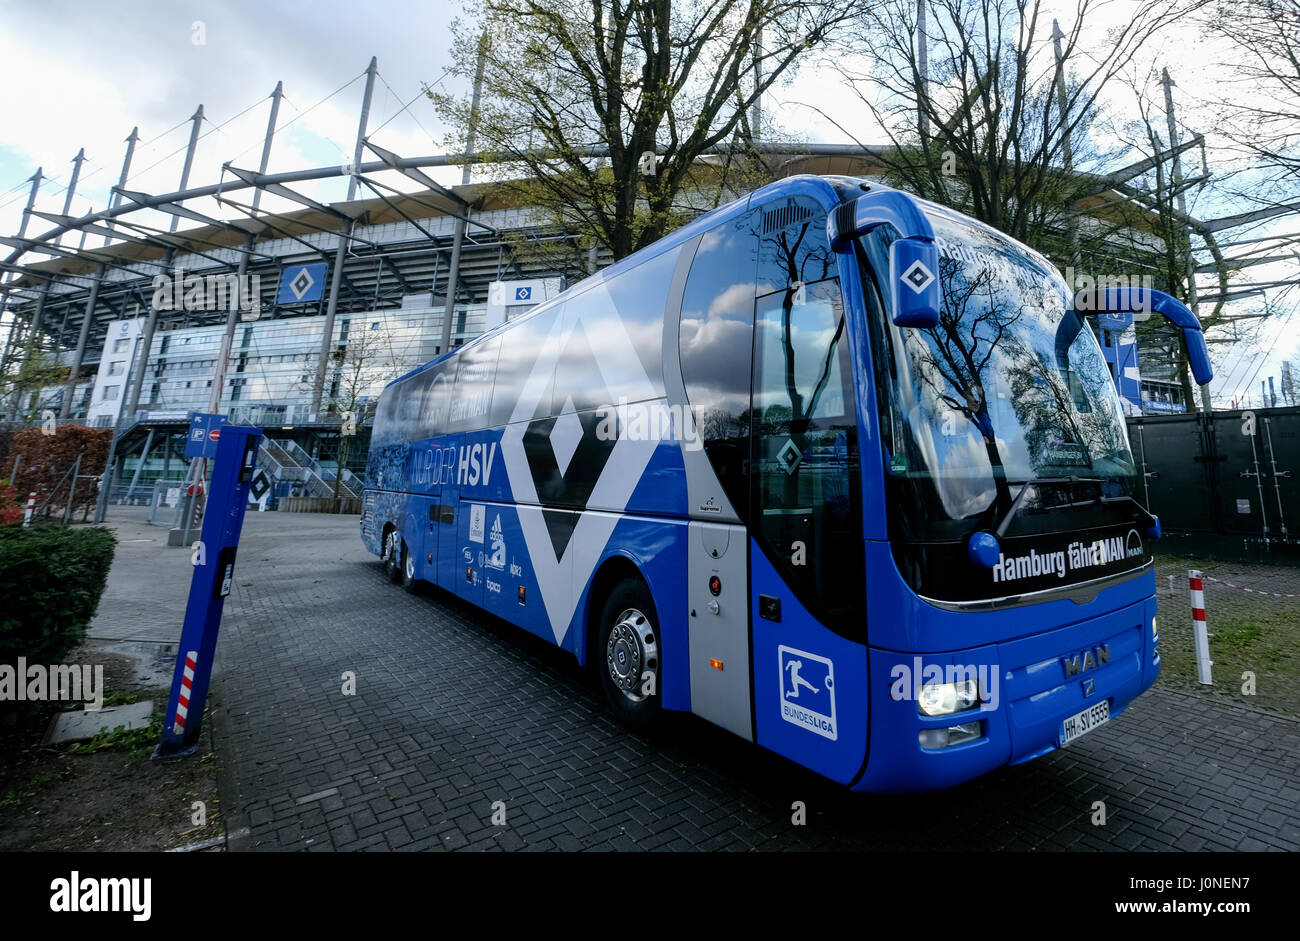 Hamburg, Germany. 15th Apr, 2017. The team bus of HSV leaves the premises of the Volksparkstadium in Hamburg, Germany, 15 April 2017. The team will head for the city of Bremen a day before their derby match against Werder Bremen. Photo: Axel Heimken/dpa/Alamy Live News Stock Photo